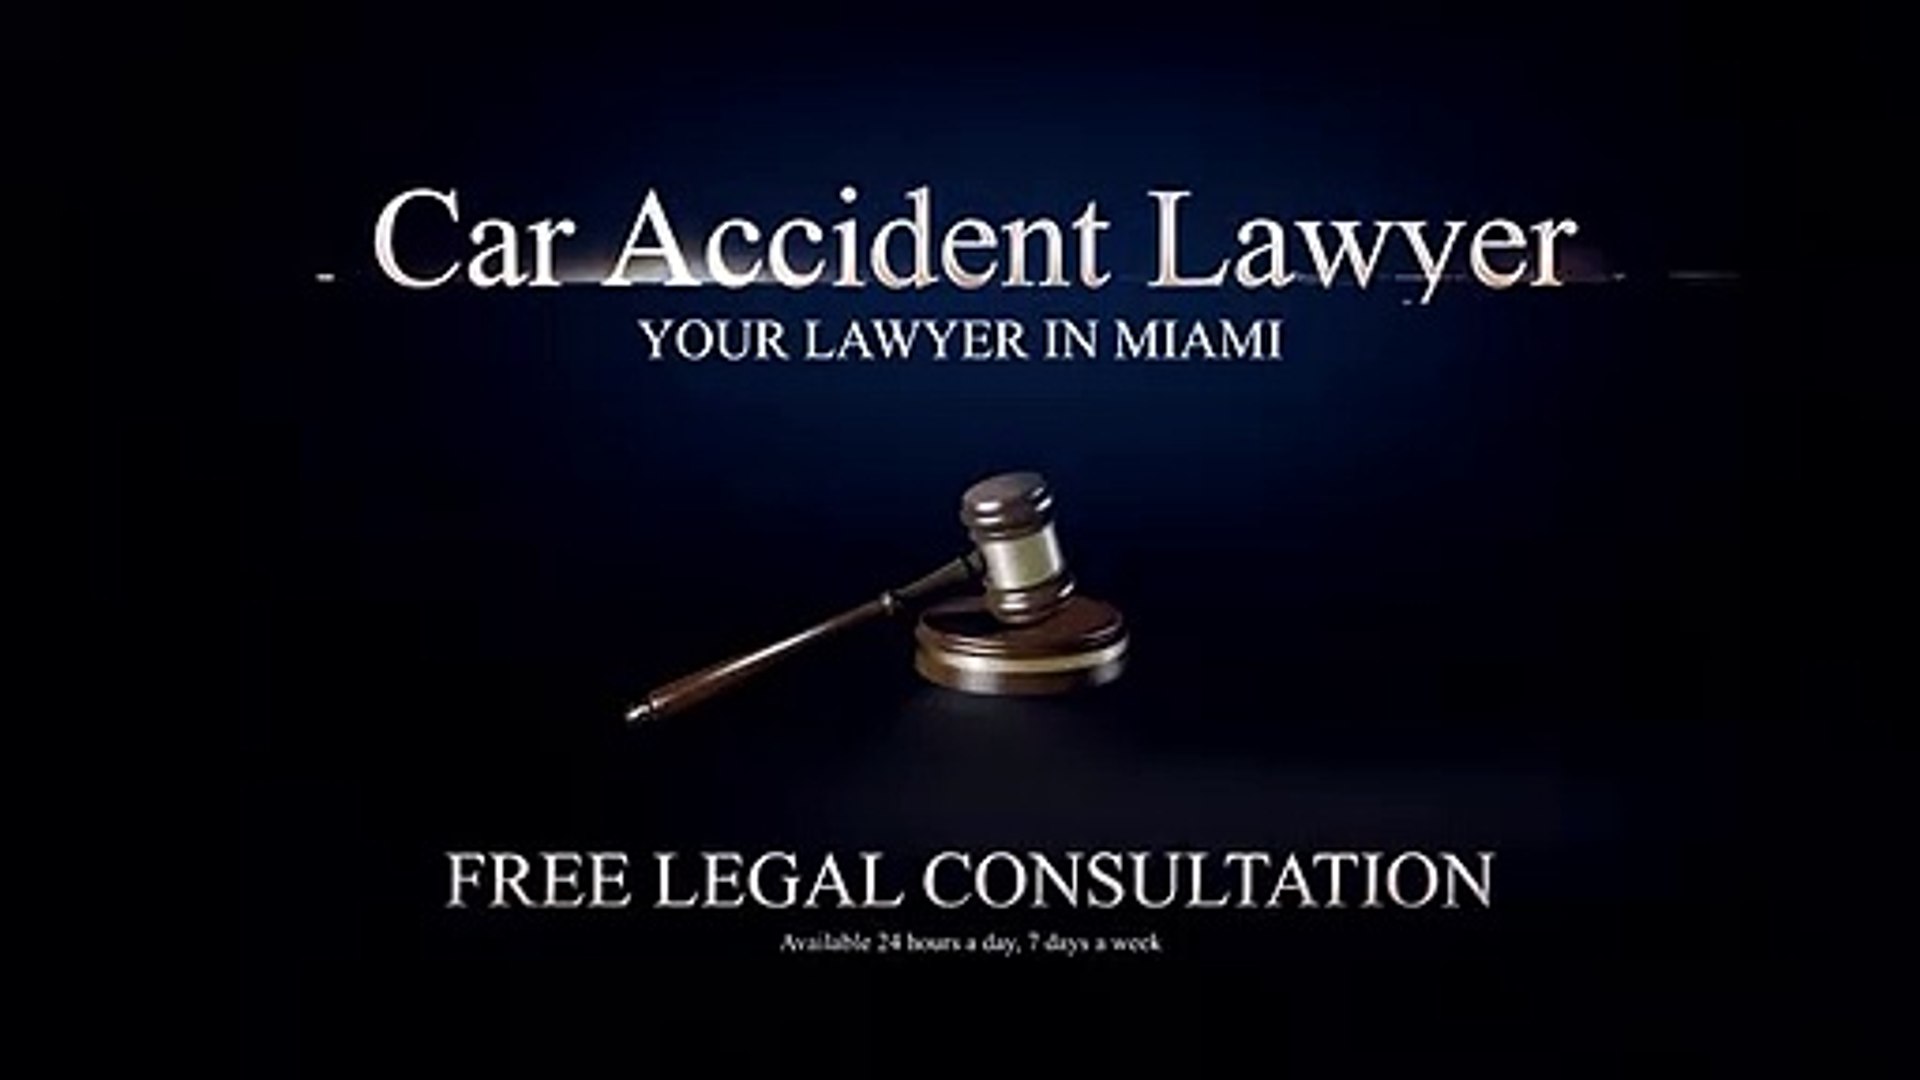 Our Favorite Miami Car Accident Lawyers